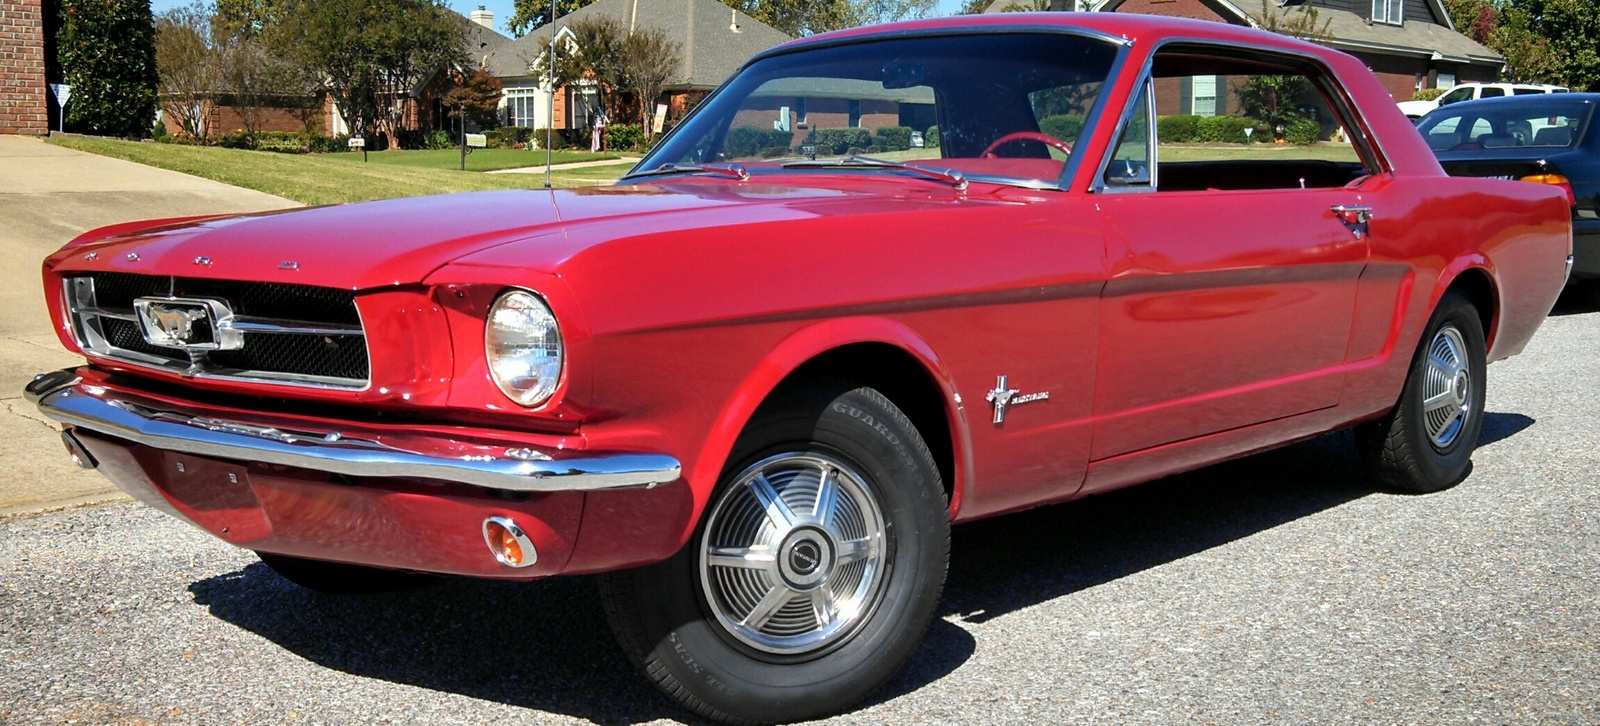 1964 Ford mustang sale canada #10